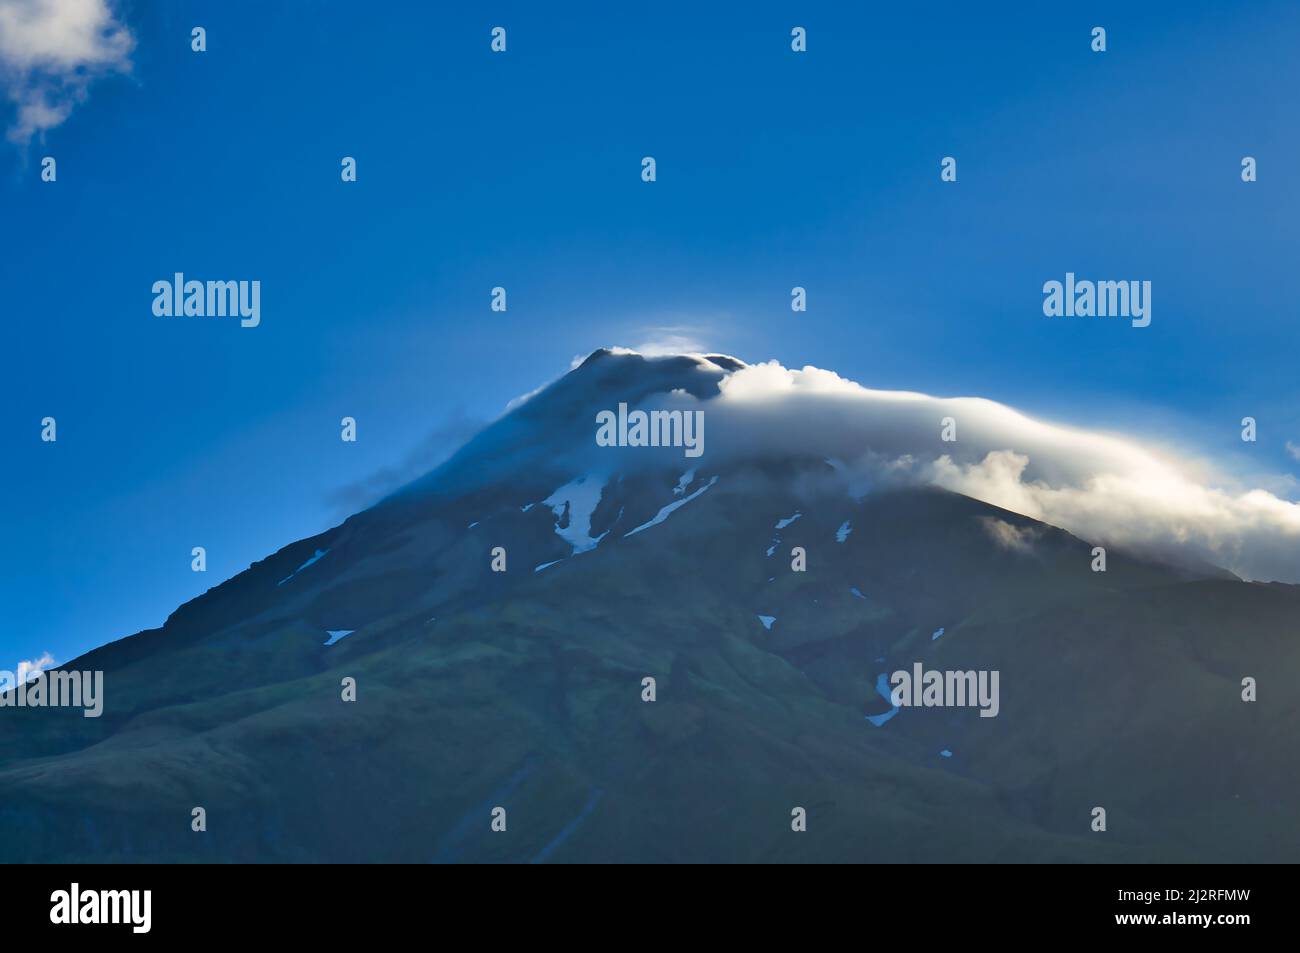 Volcano with snowfields and clouds around the summit, lit by the evening sun. Mount Taranaki (Mount Egmont), North Island, New Zealand. Stock Photo